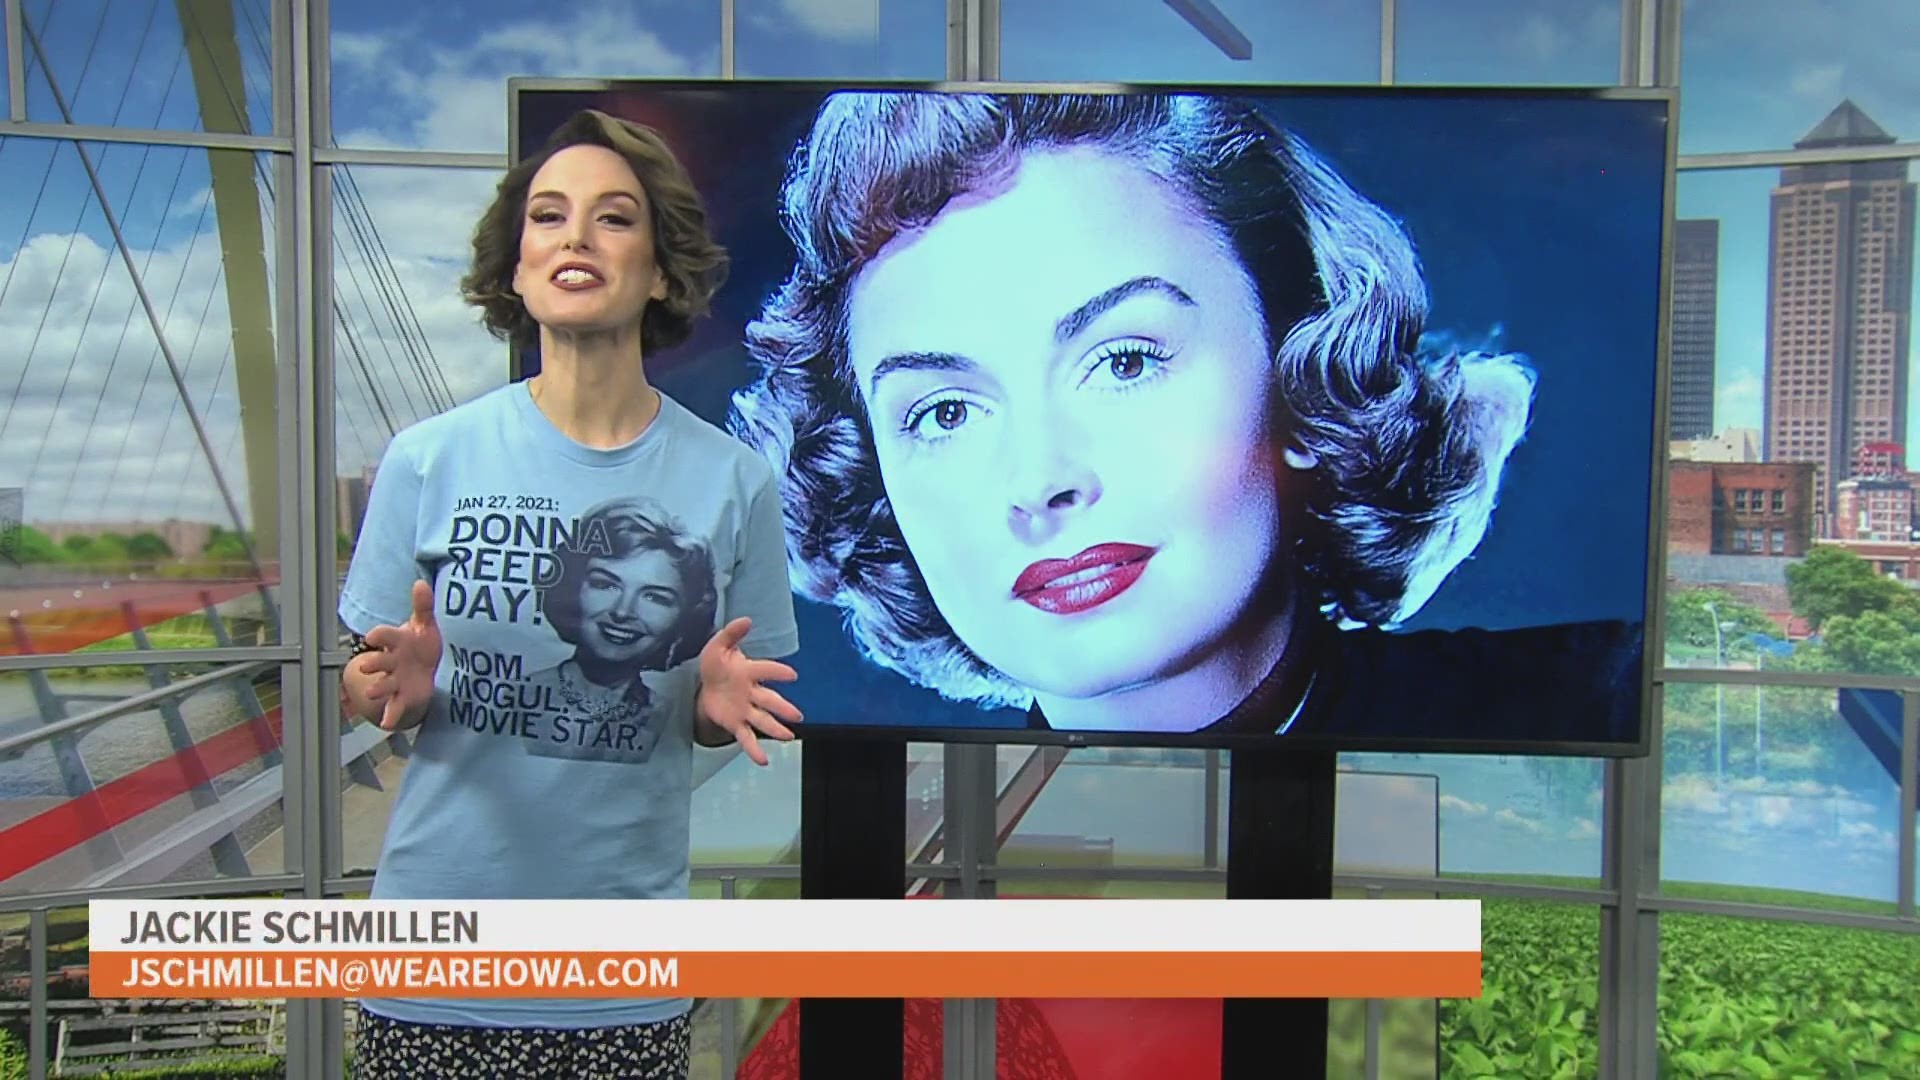 Today marks a special day as Donna Reed, an Iowan icon would be turning 100 years old.